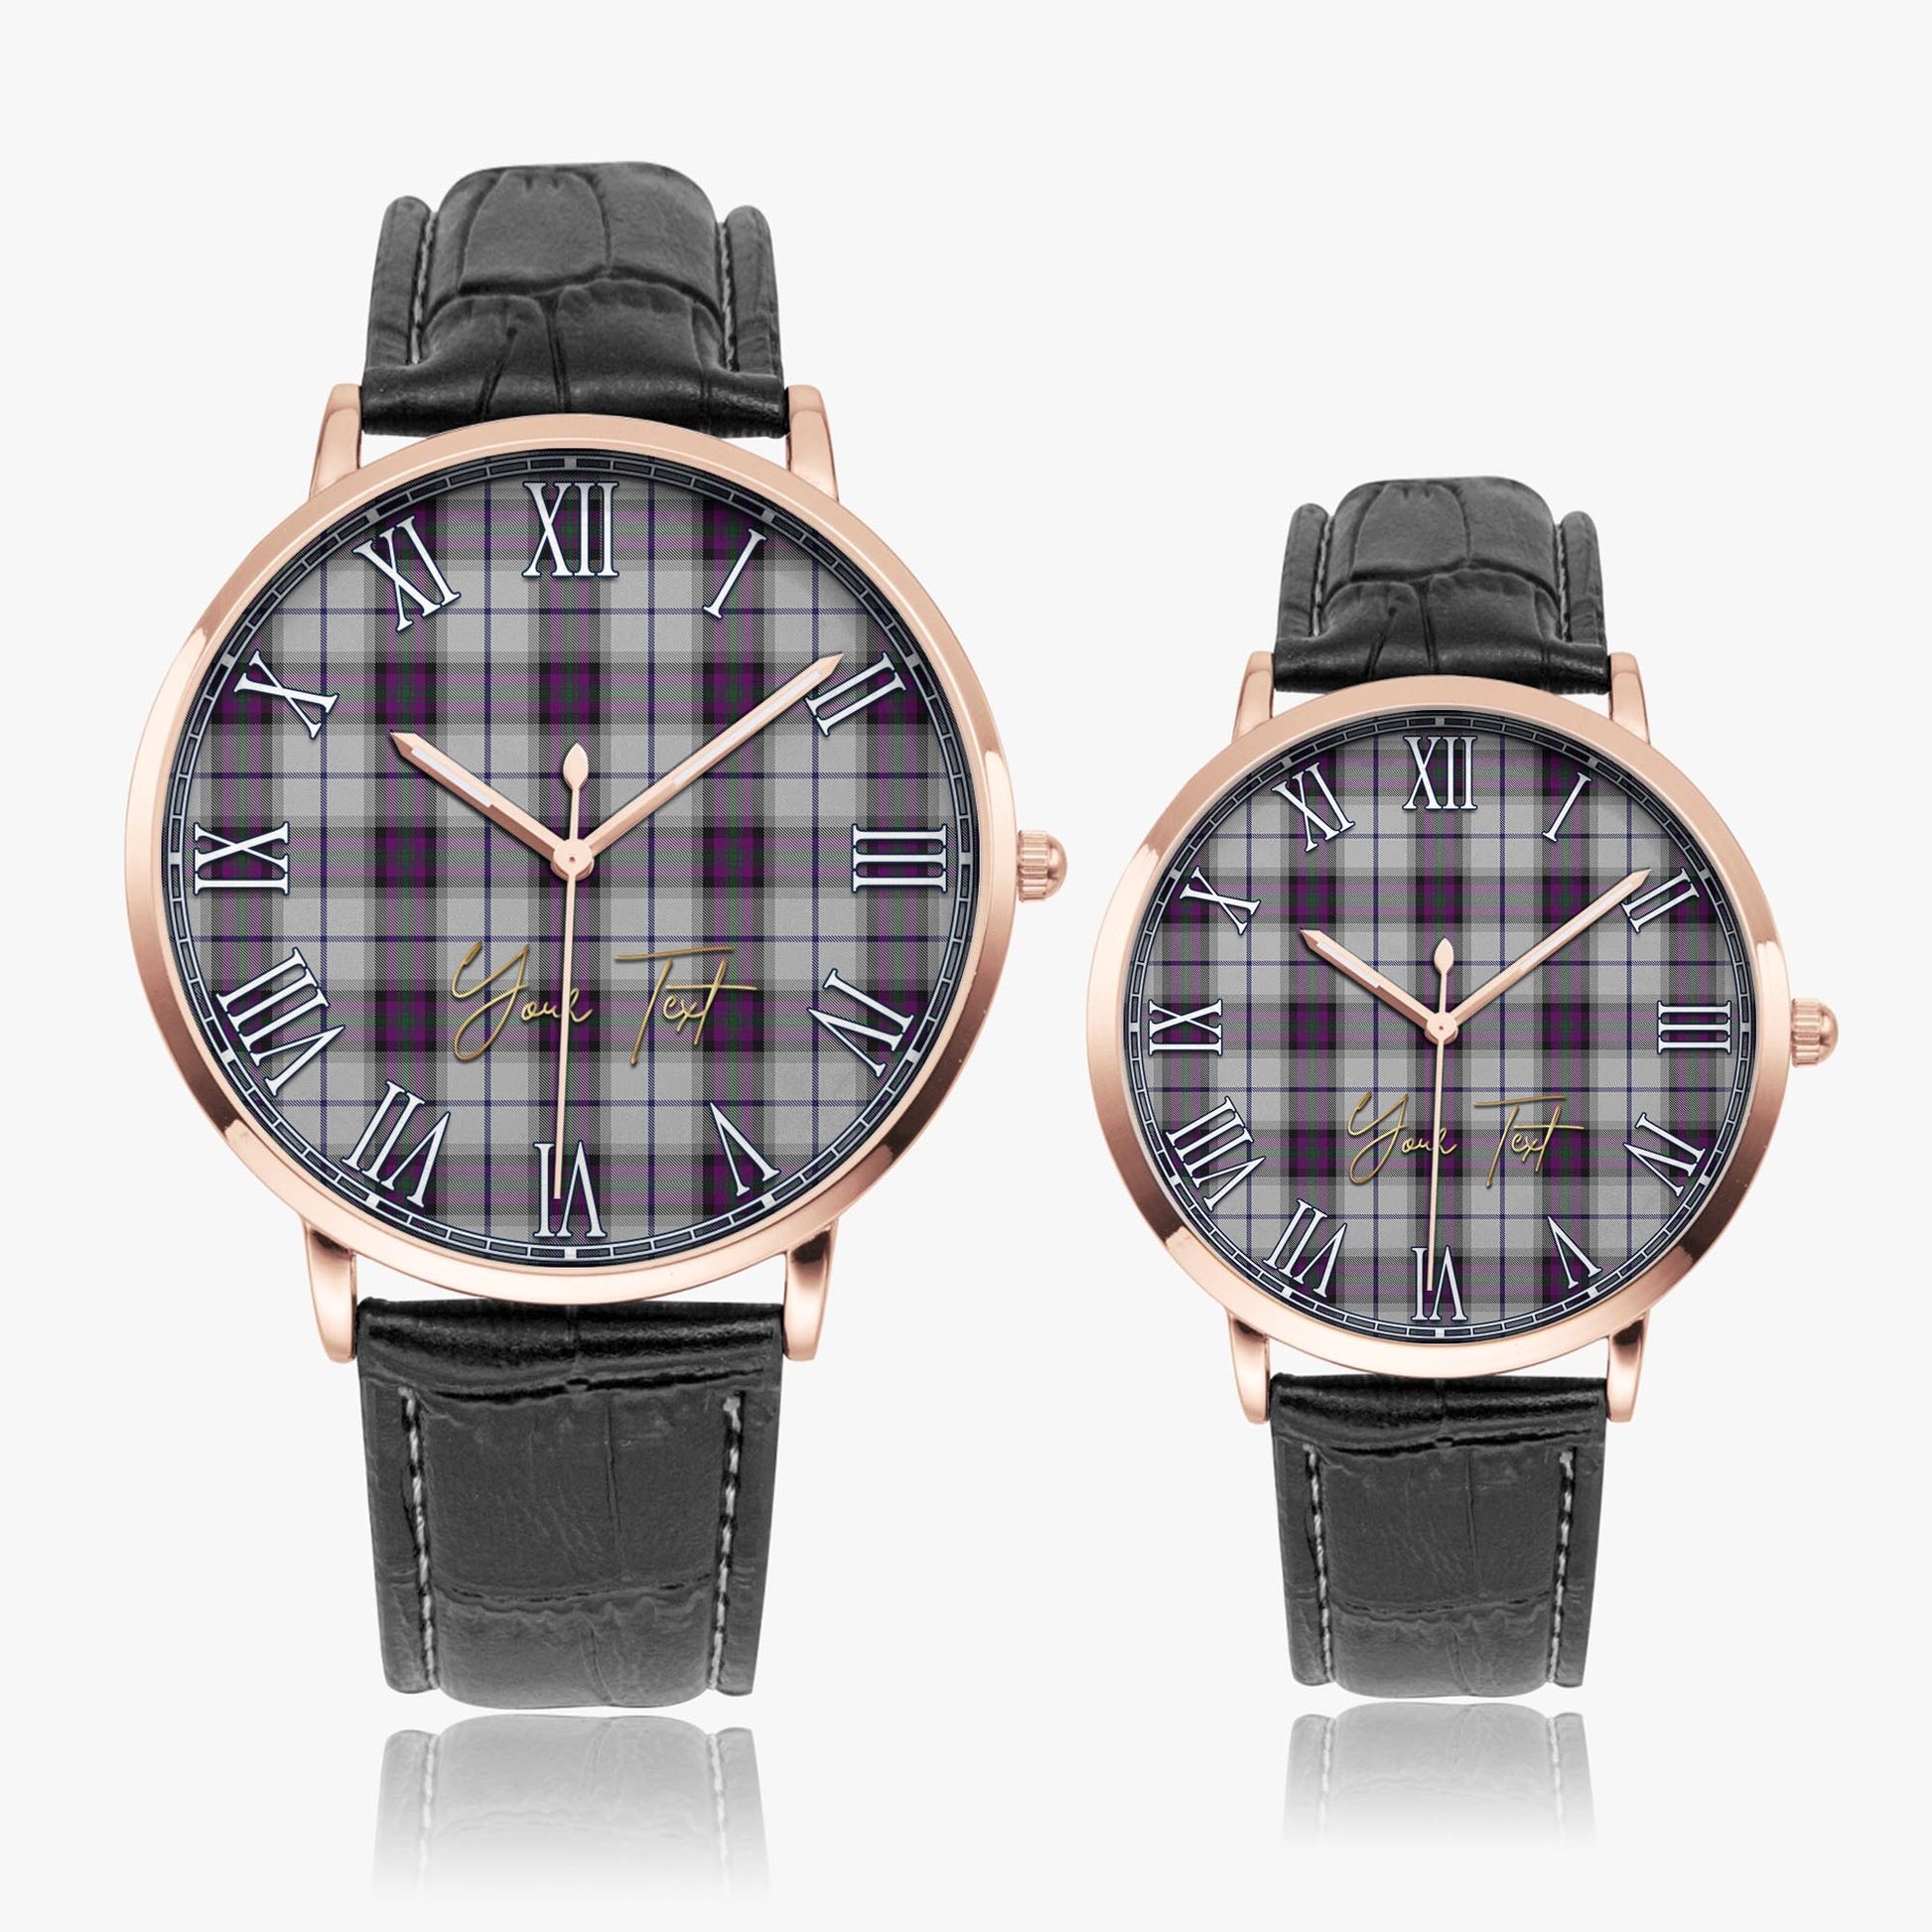 Alexander of Menstry Dress Tartan Personalized Your Text Leather Trap Quartz Watch Ultra Thin Rose Gold Case With Black Leather Strap - Tartanvibesclothing